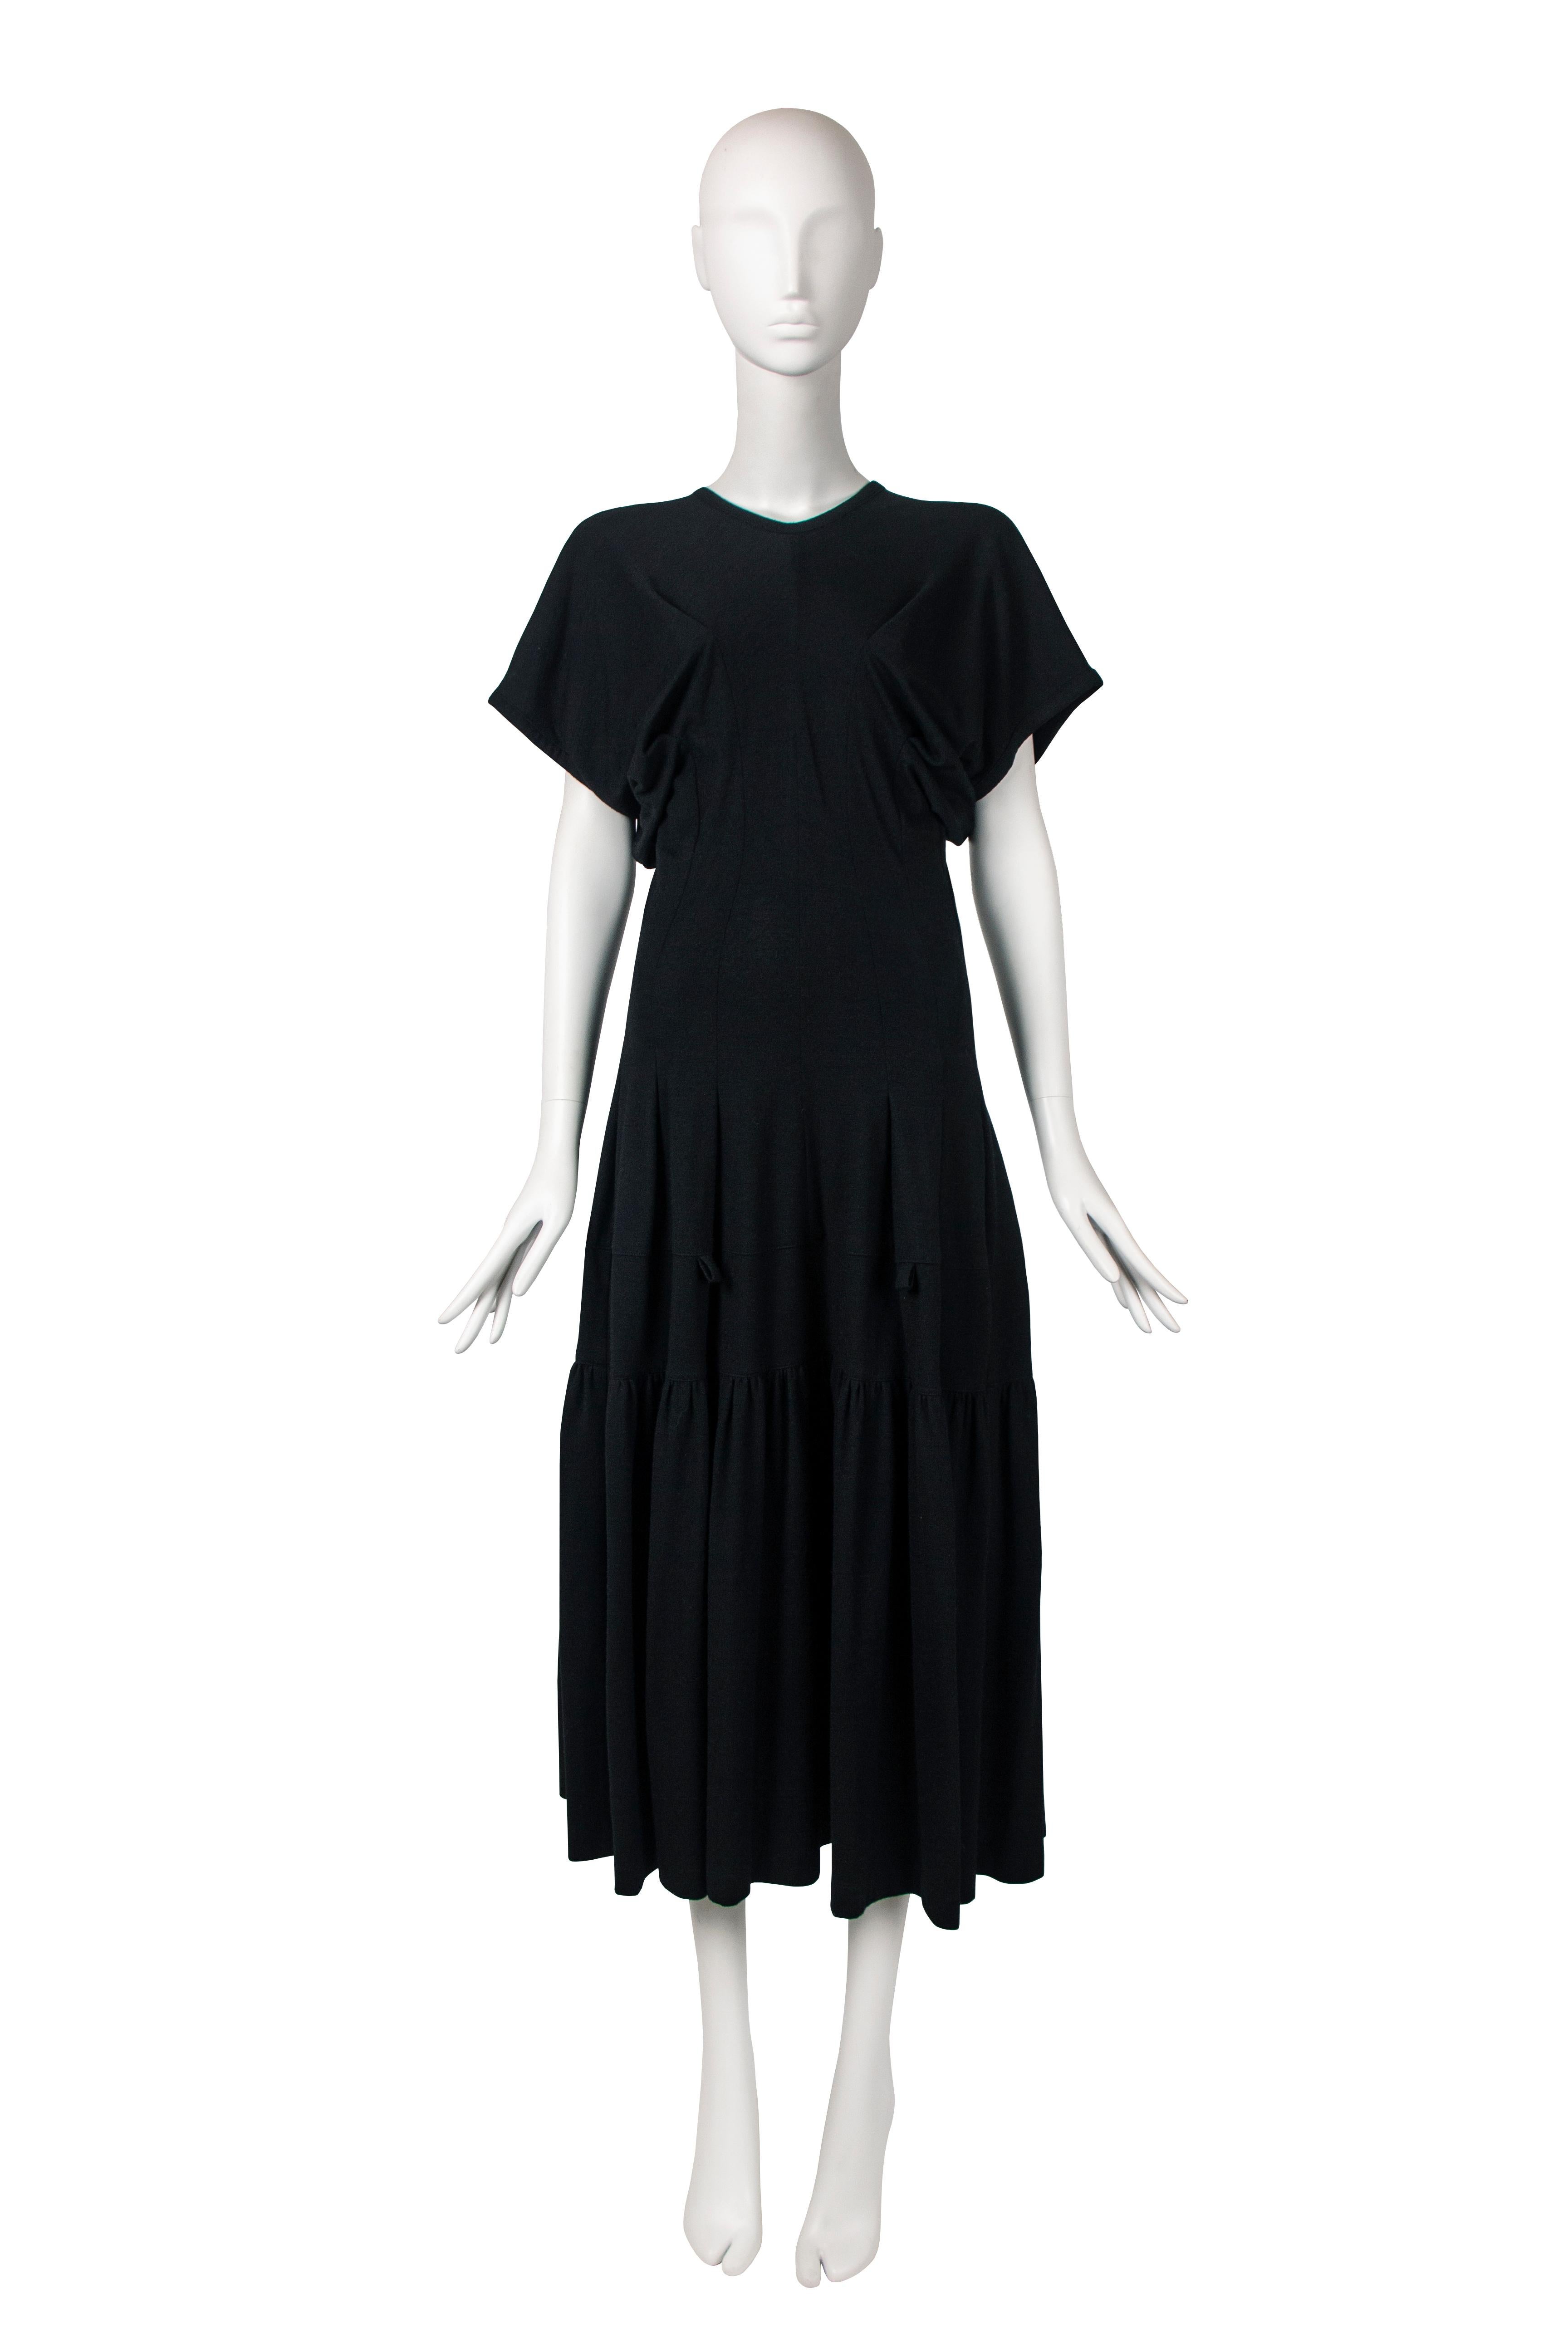 This Comme Des Garcons dress from the fall-winter 1989 collection is a panelled long wool dress with interesting design features. The dress has 5 seams running down from the bust that shape the garment and create a form-fitting midsection. The skirt